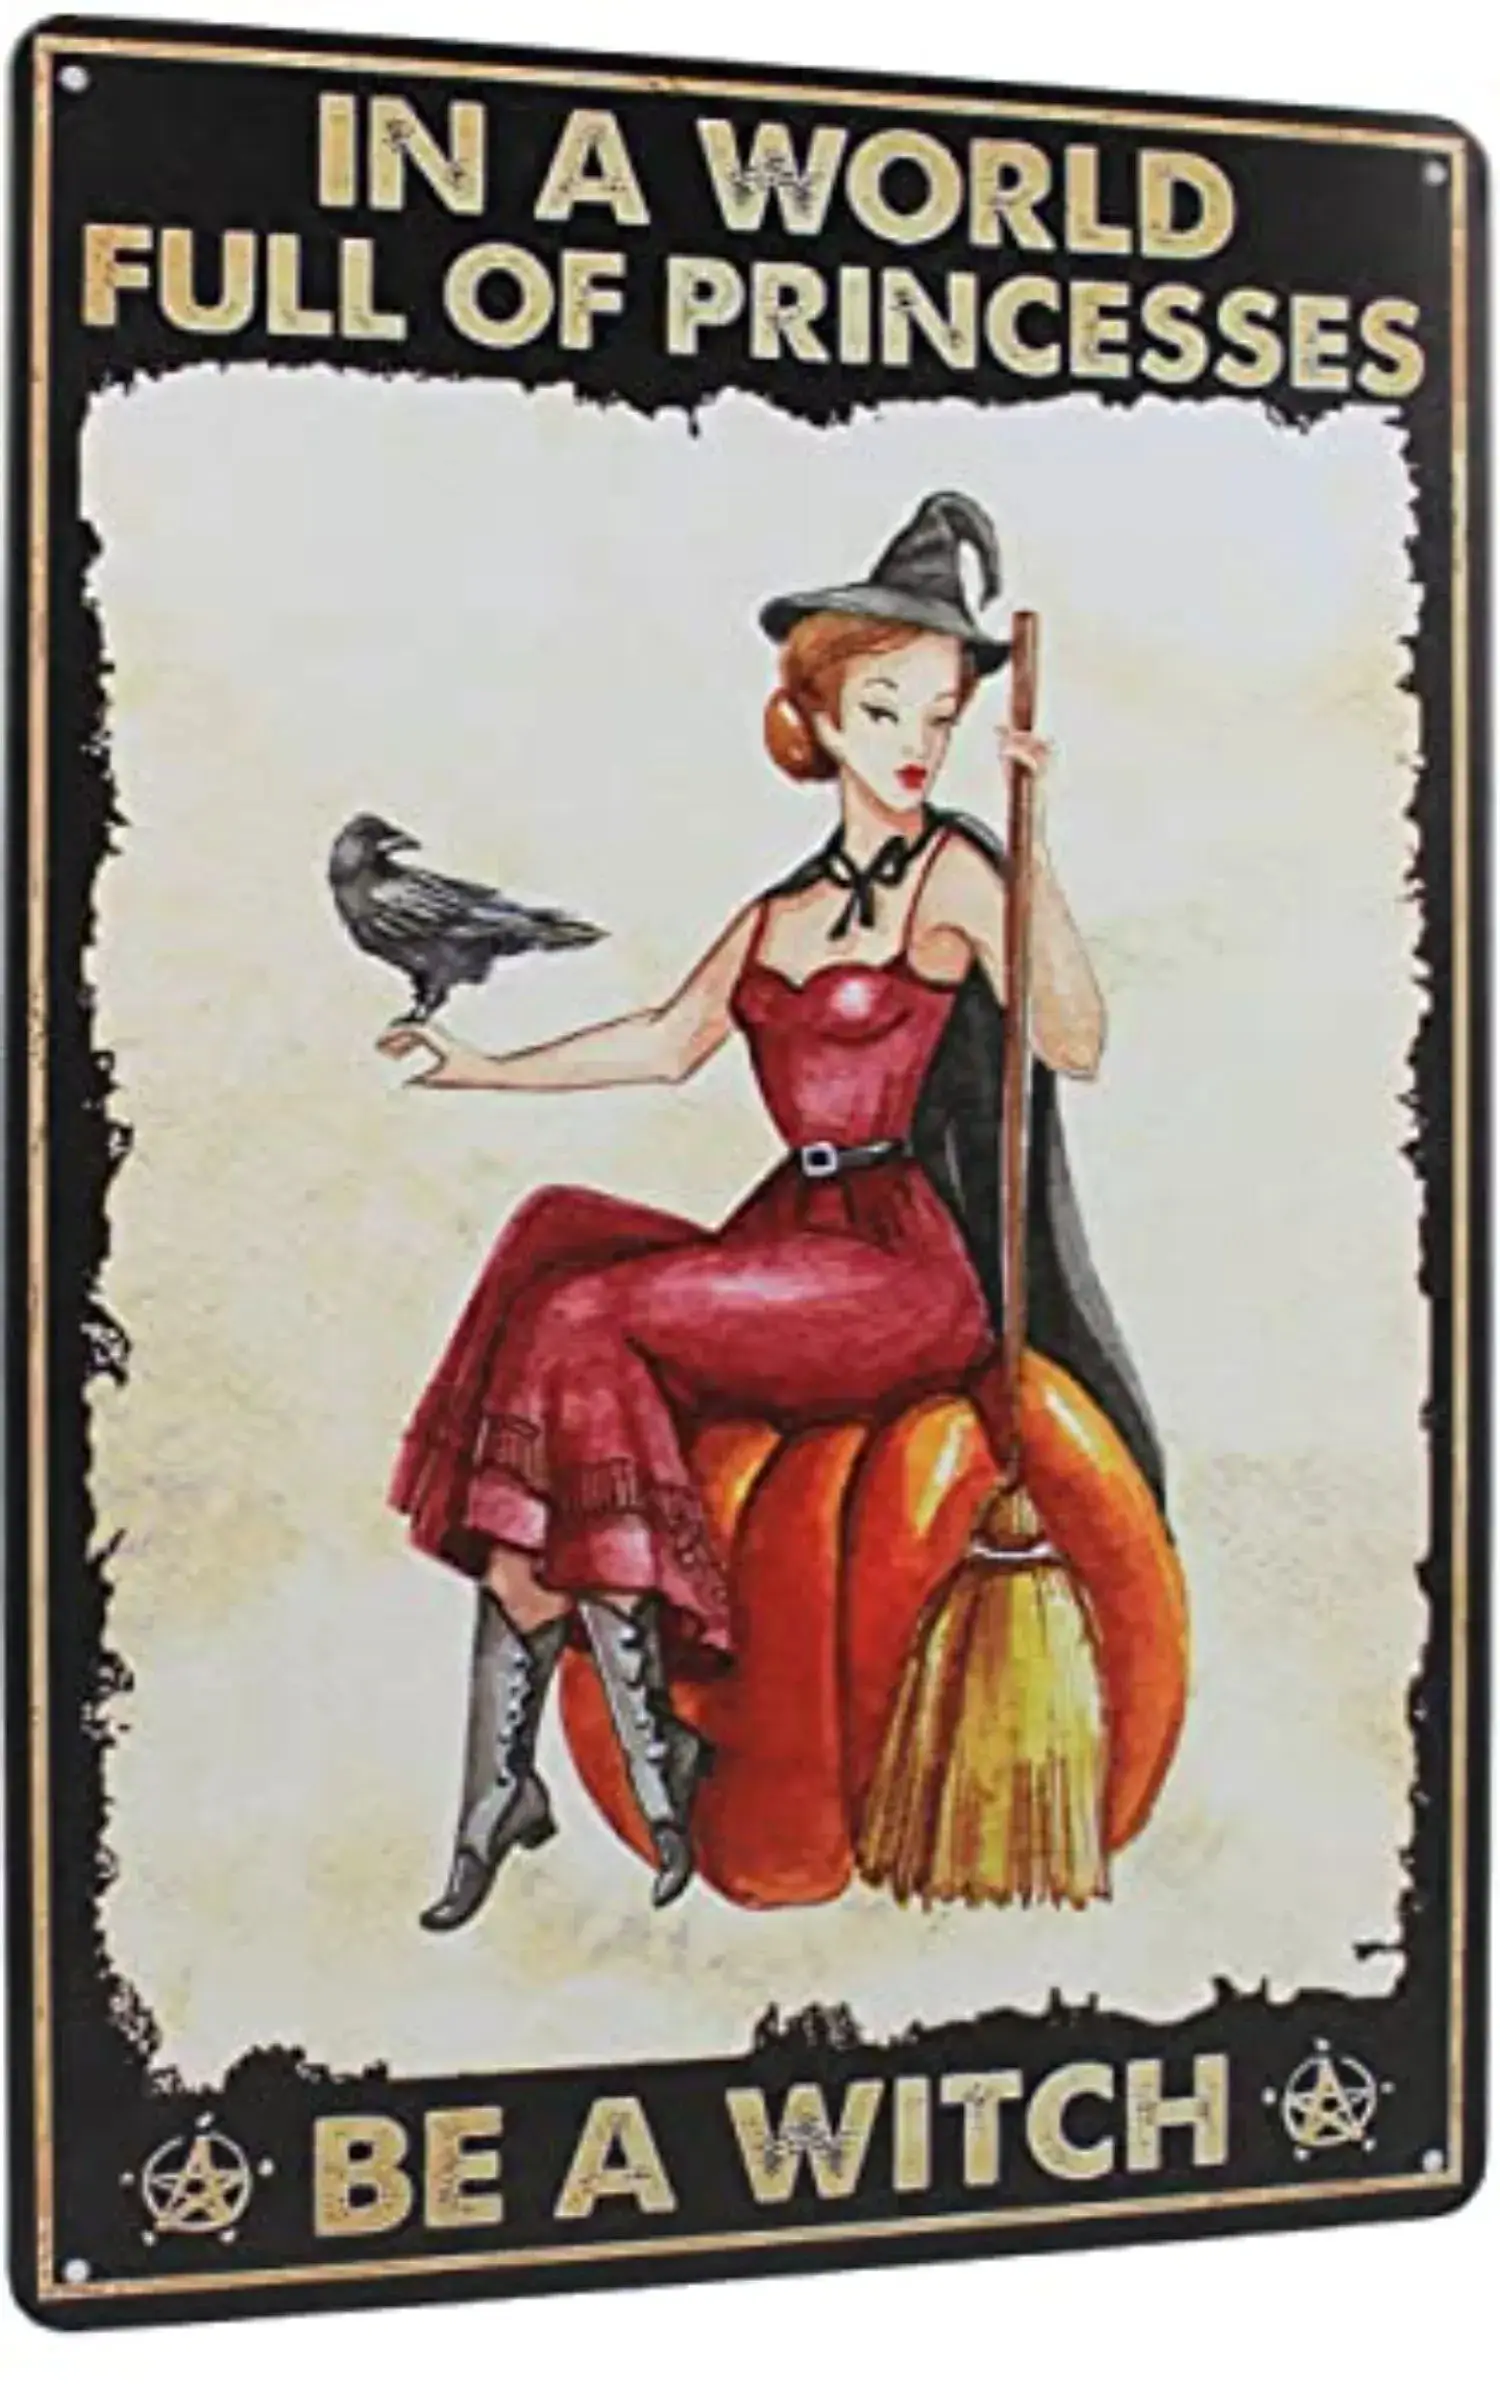 

Vintage Halloween Metal Tin Sign, Witch, Iron Painting, Halloween Decoration, Witch Gifts, Home Wall Decoration, Plaques & Signs